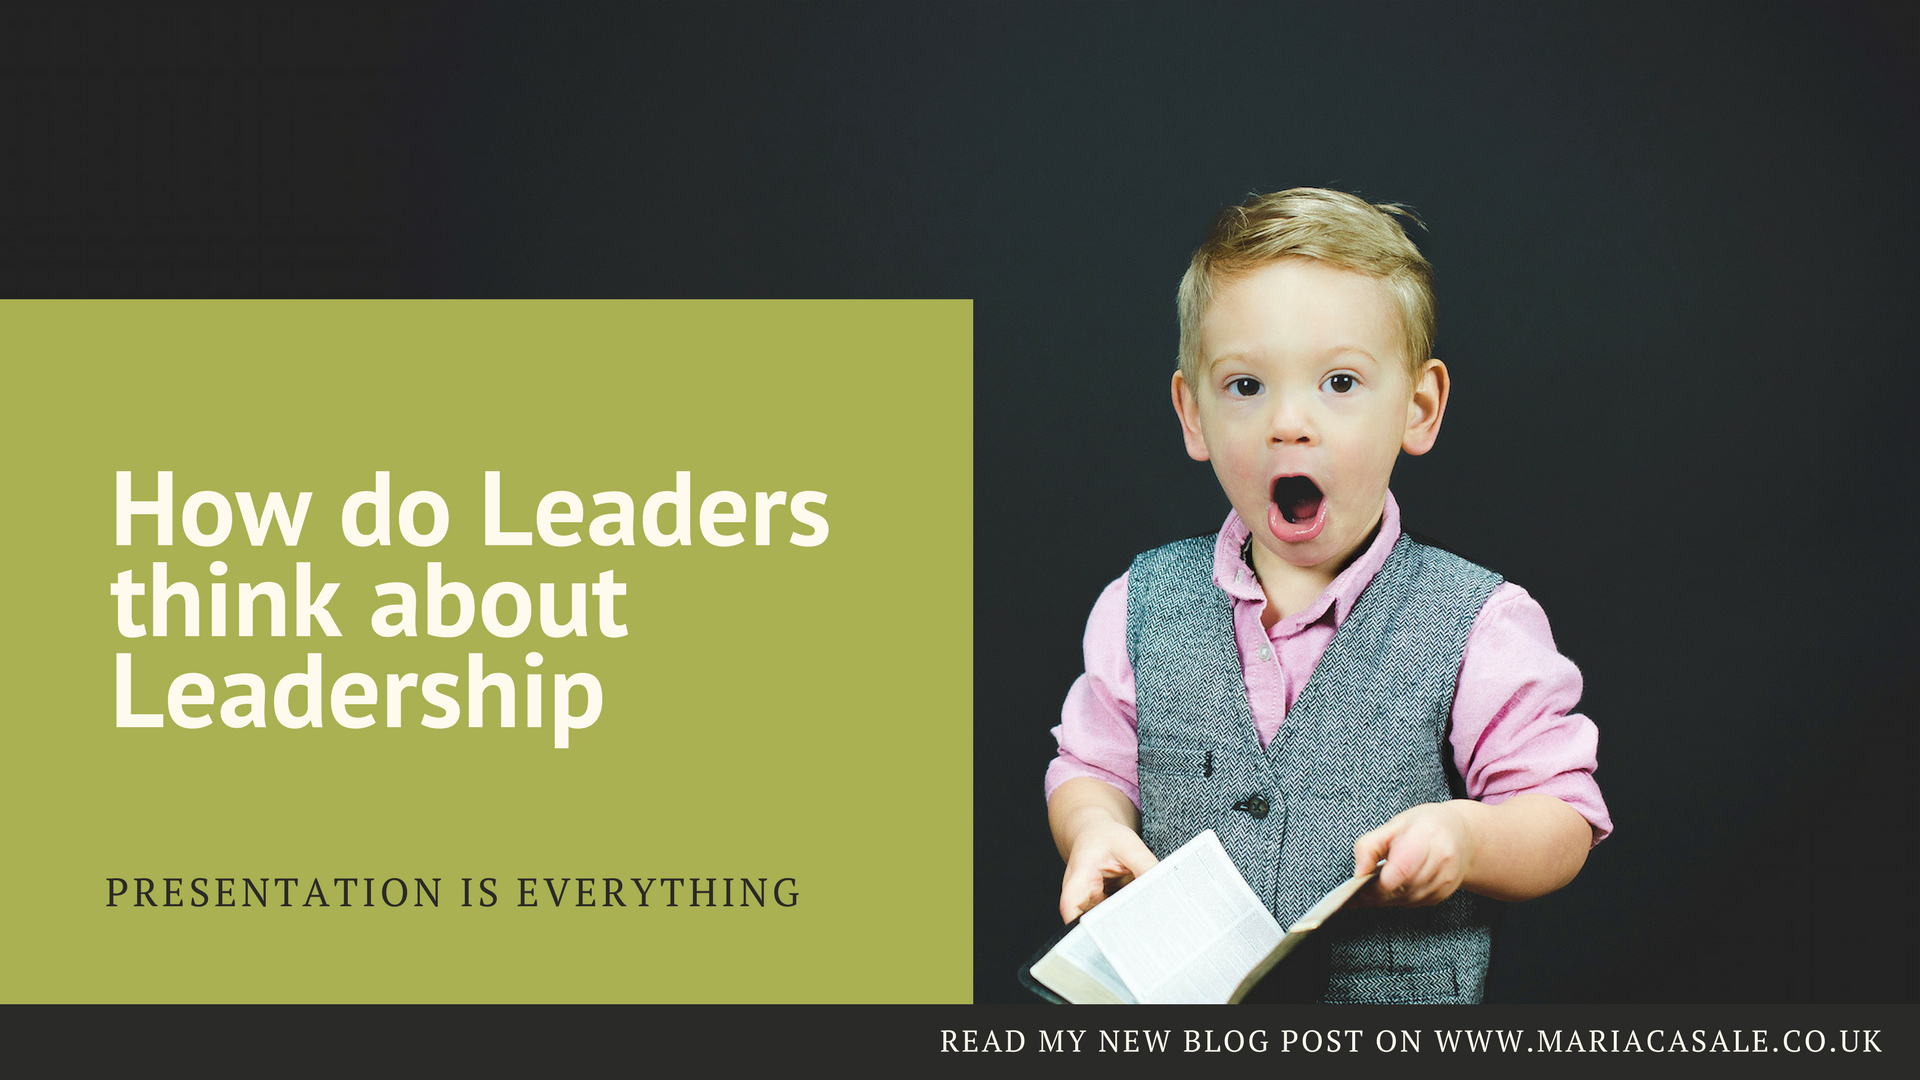 How do Leaders think about Leadership